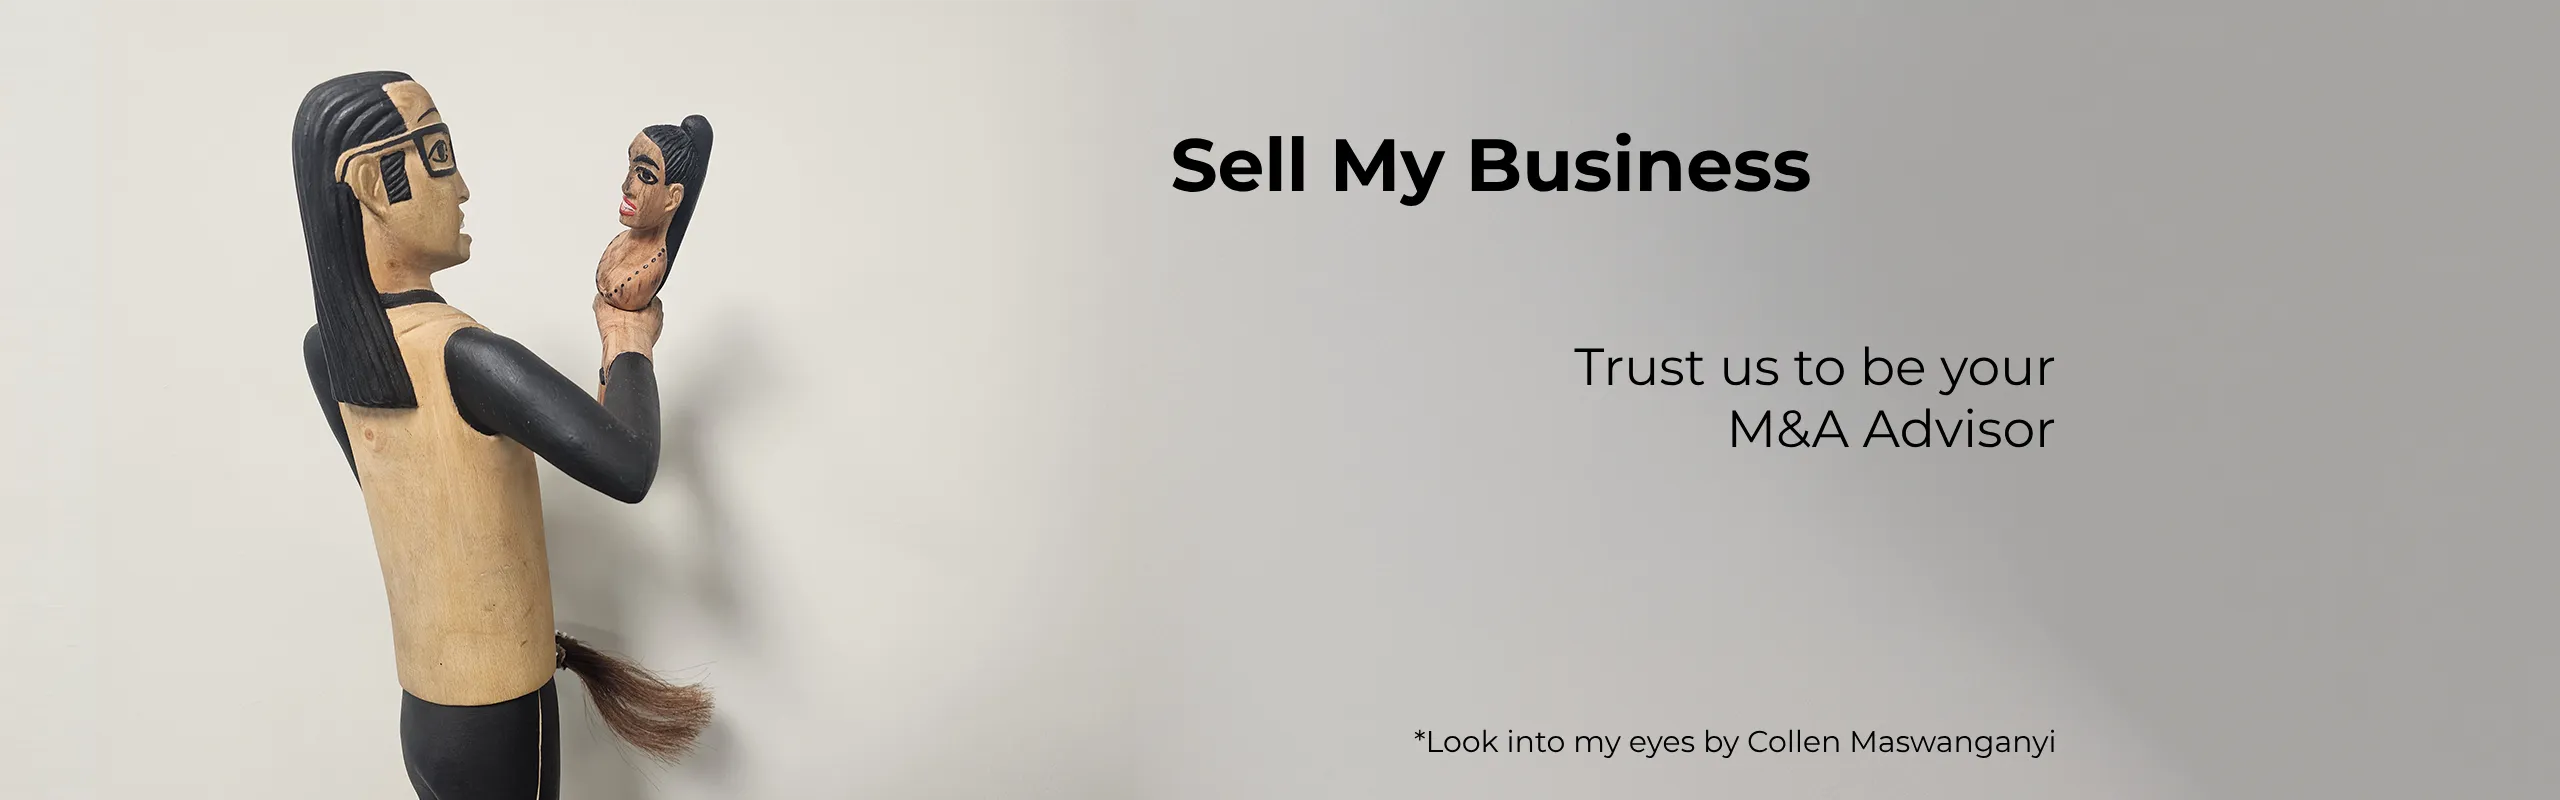 Trust Merchantec to sell your business